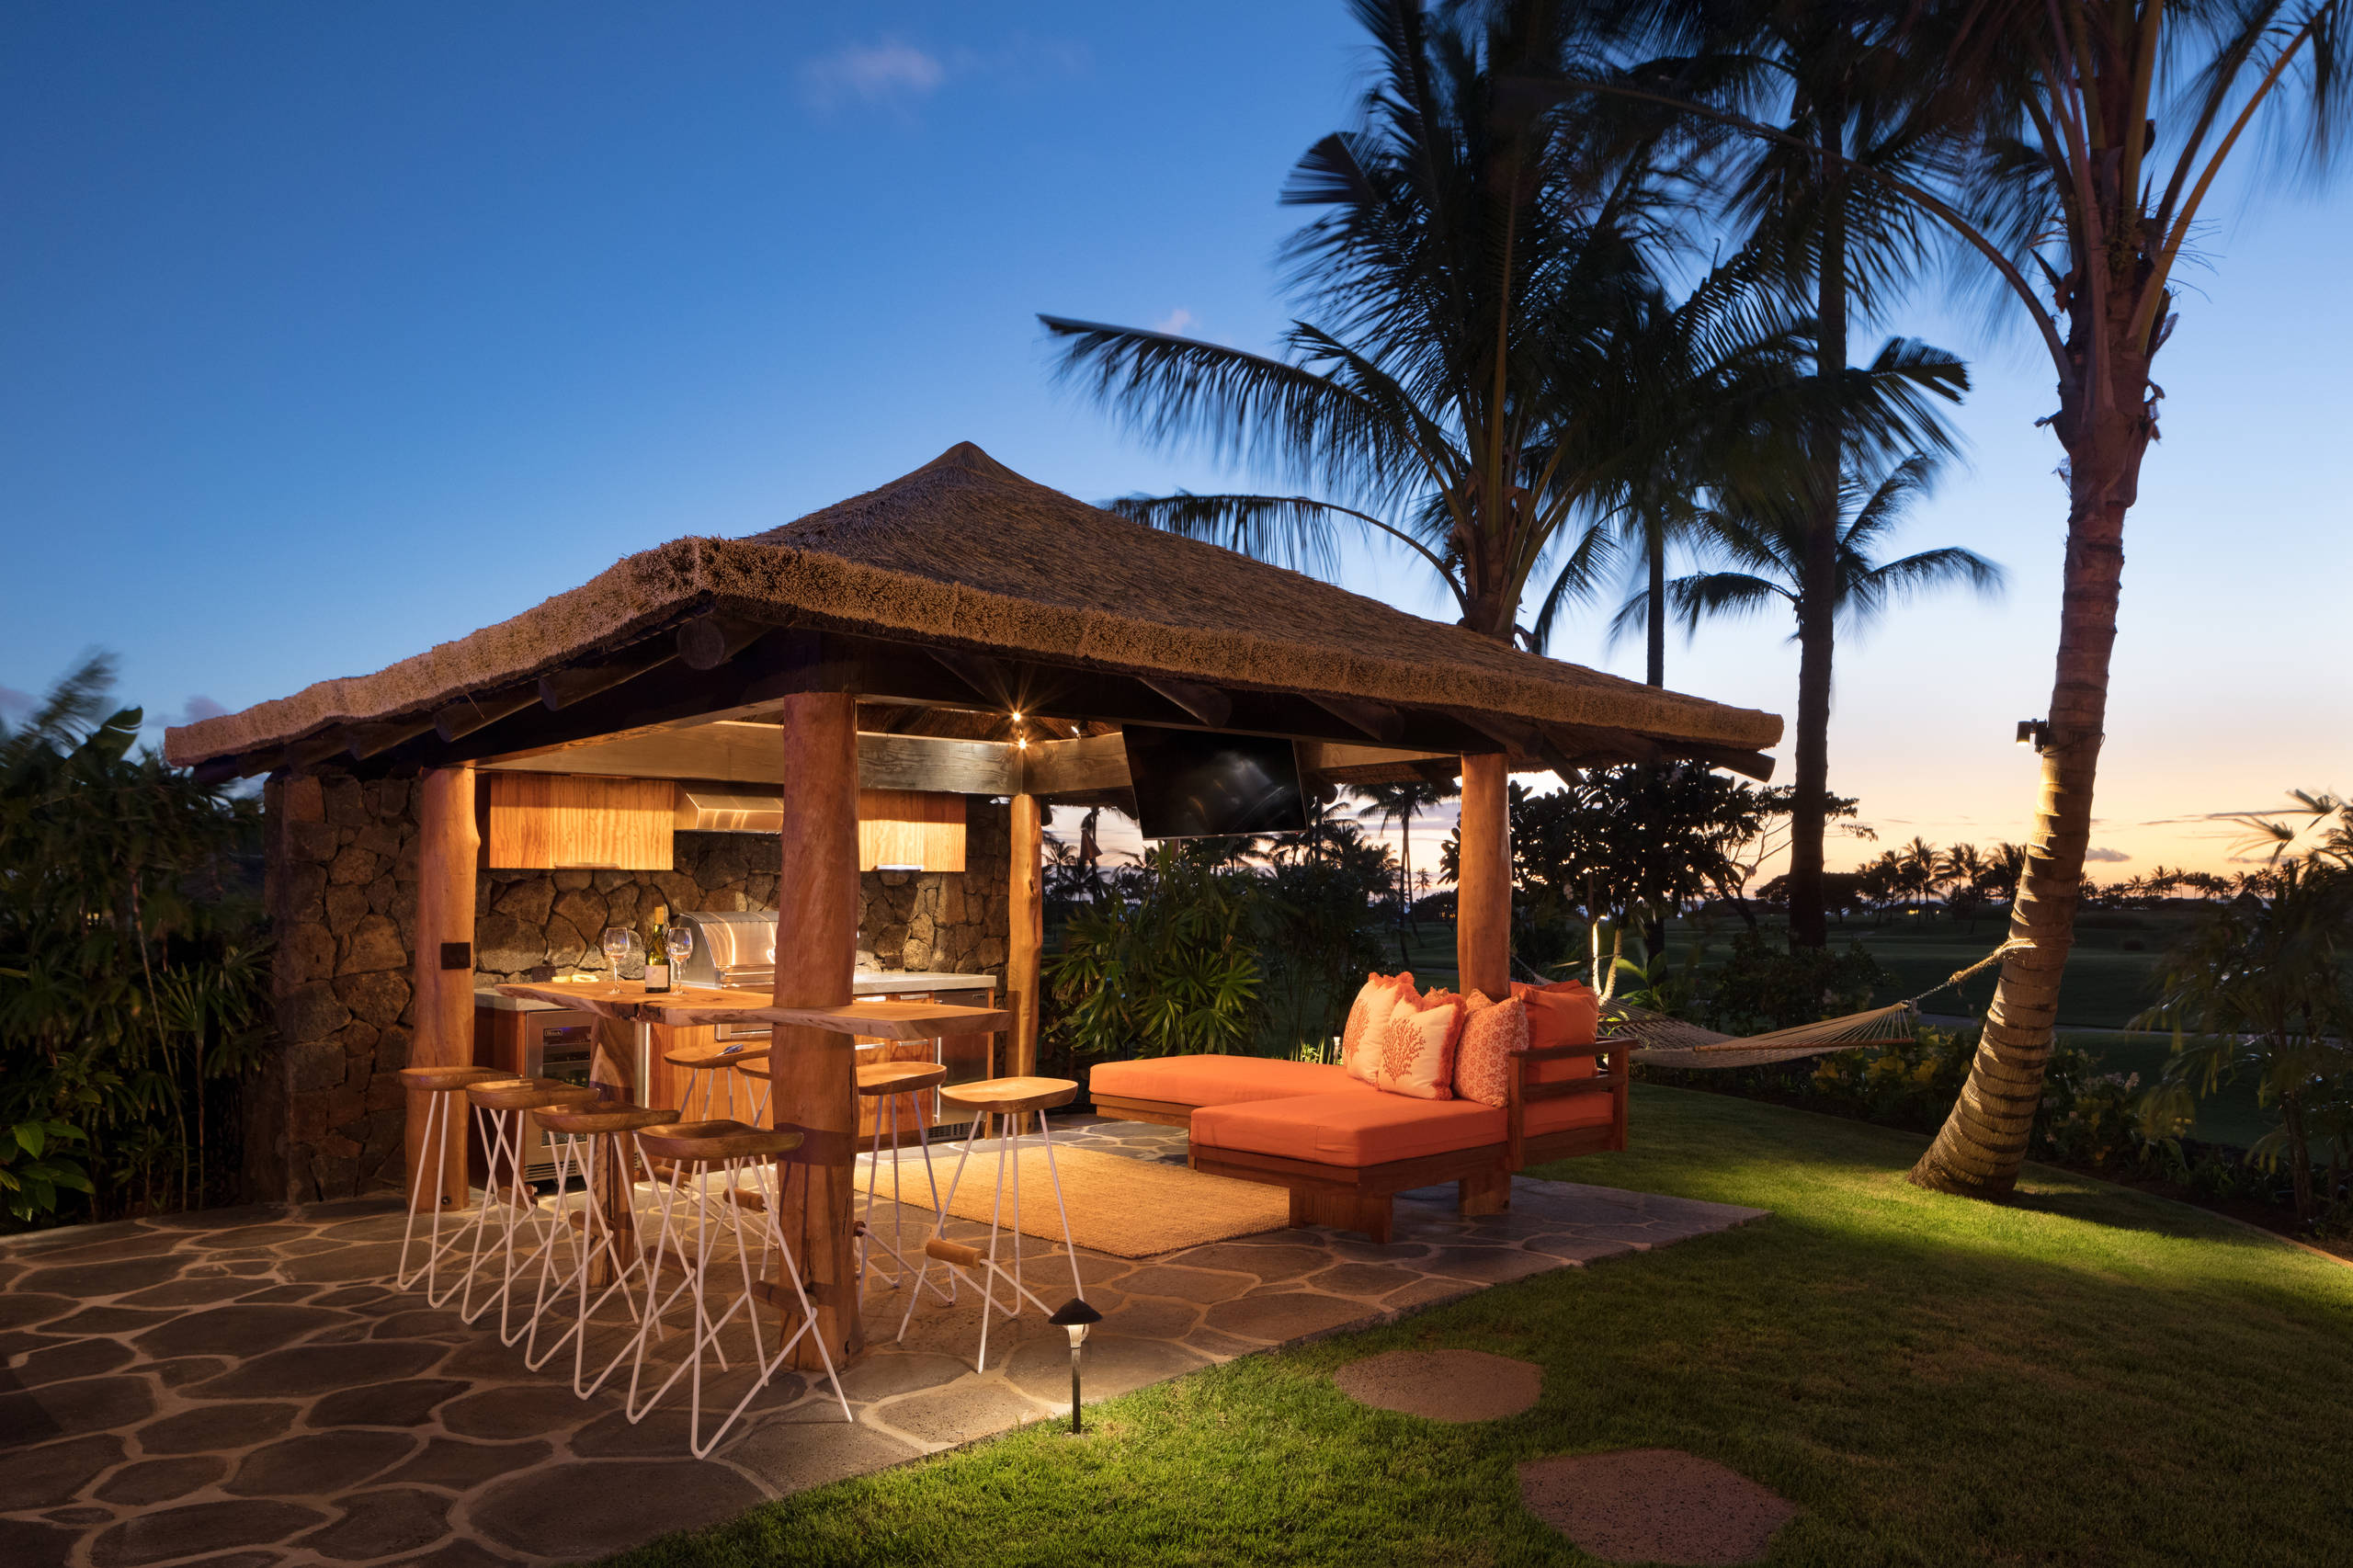 Backyard Living With Thatched Roof Gazebo - Aarons Outdoor Living